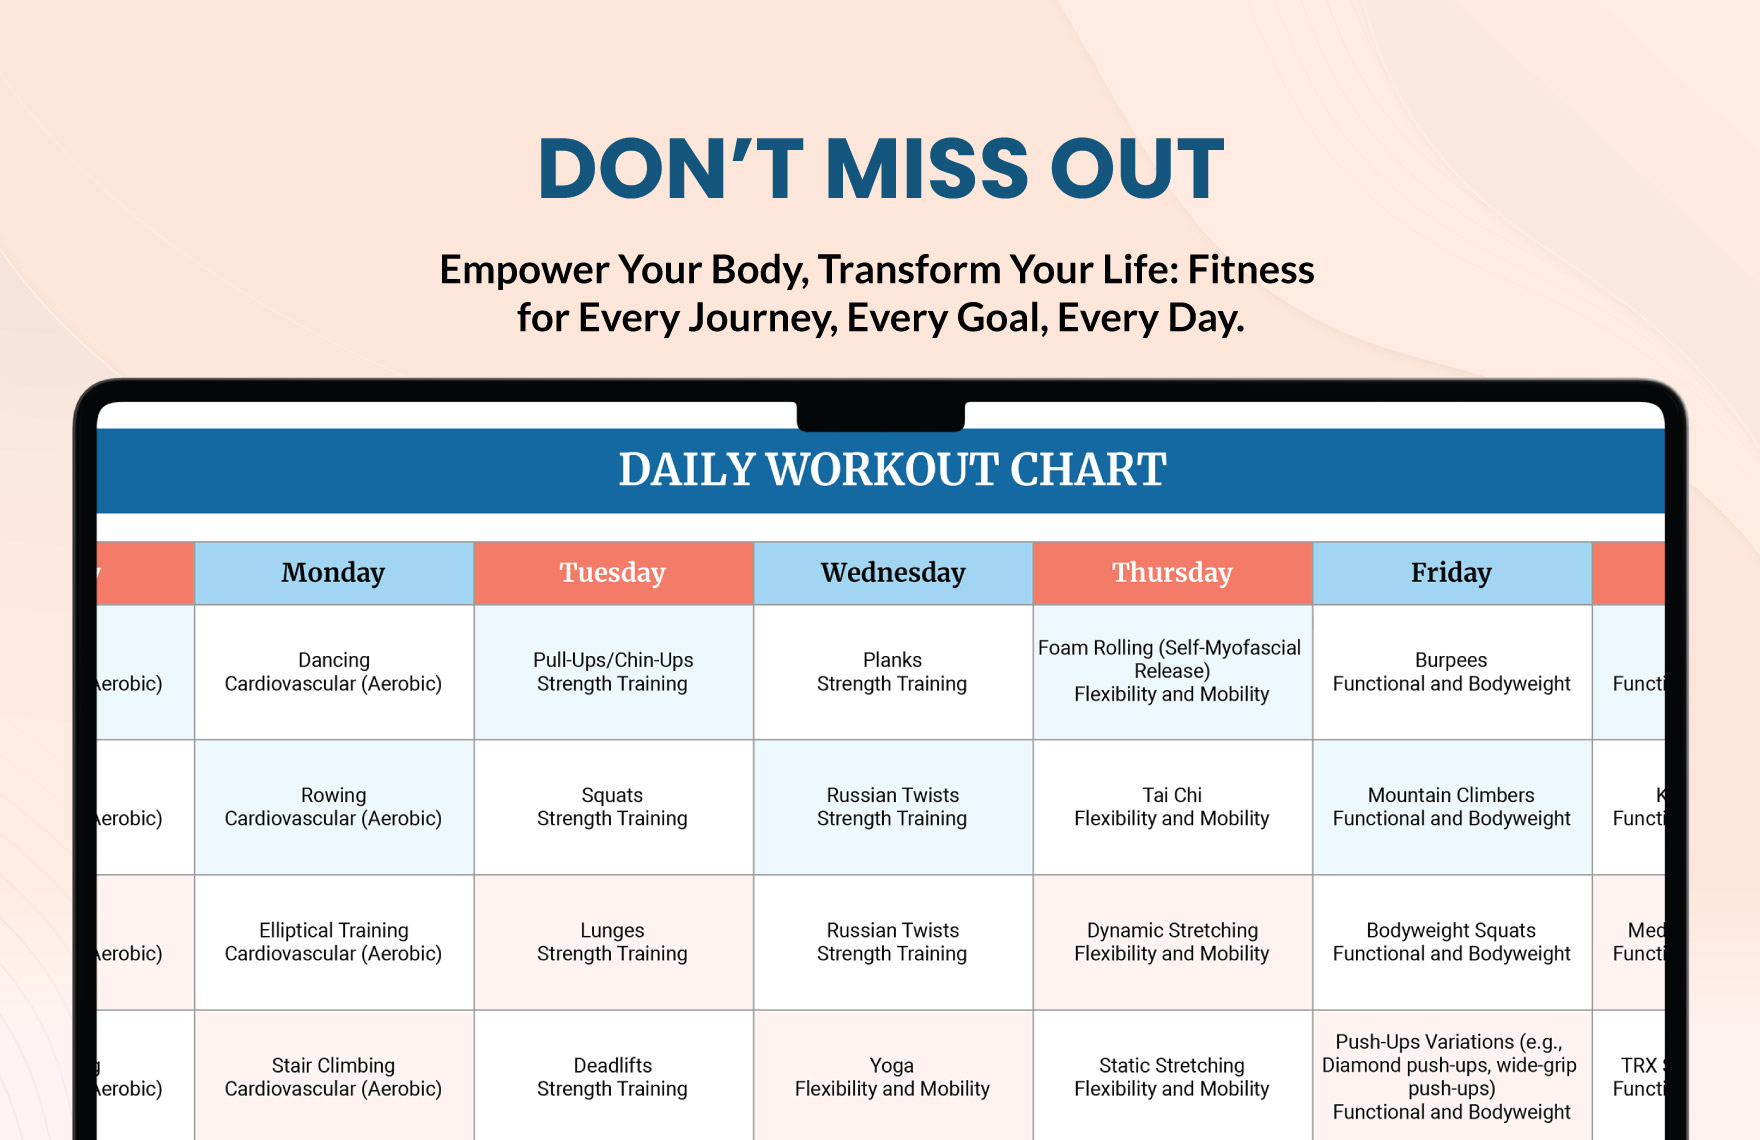 Daily Workout Chart Template